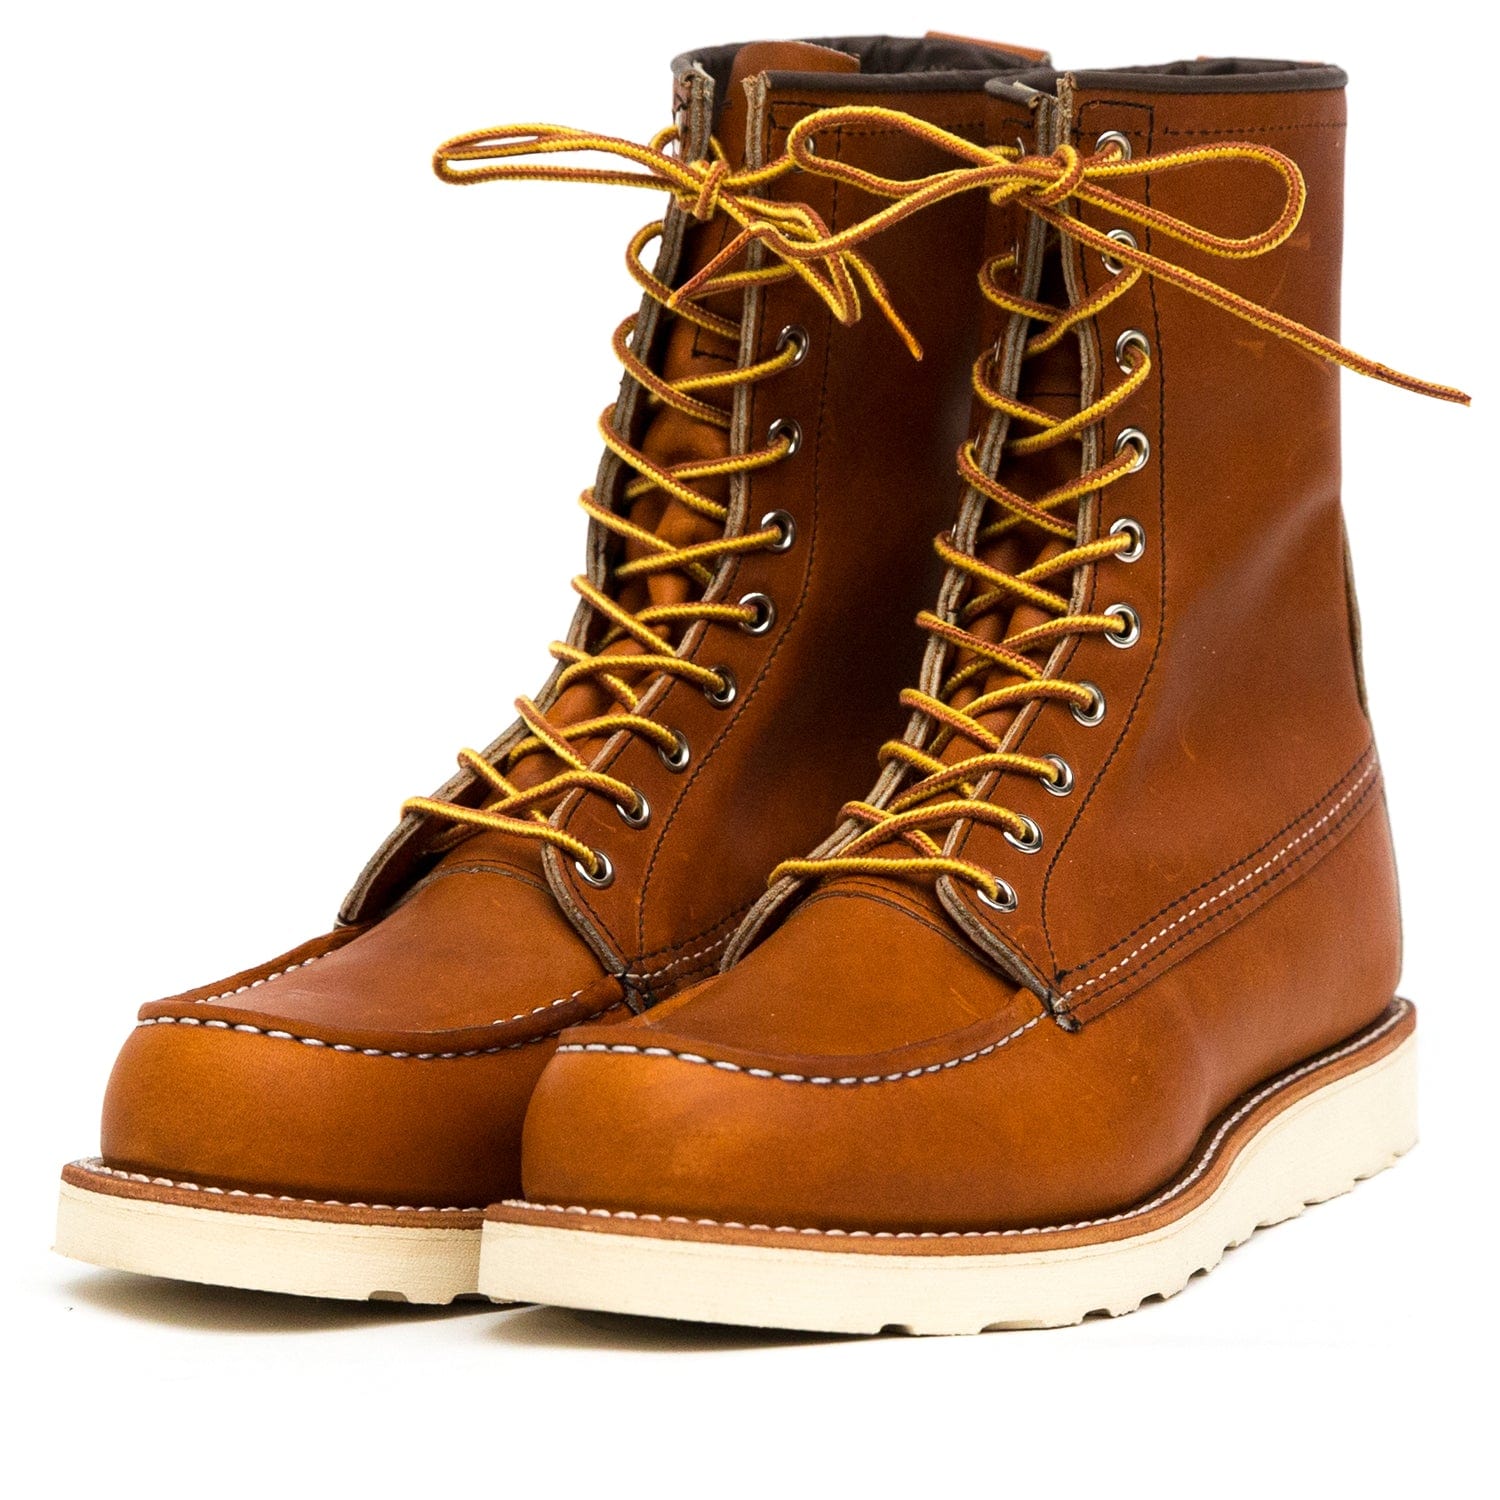 Red Wing Heritage 6-Inch Classic Moc Boot - Men's Oro Legacy, 11.5